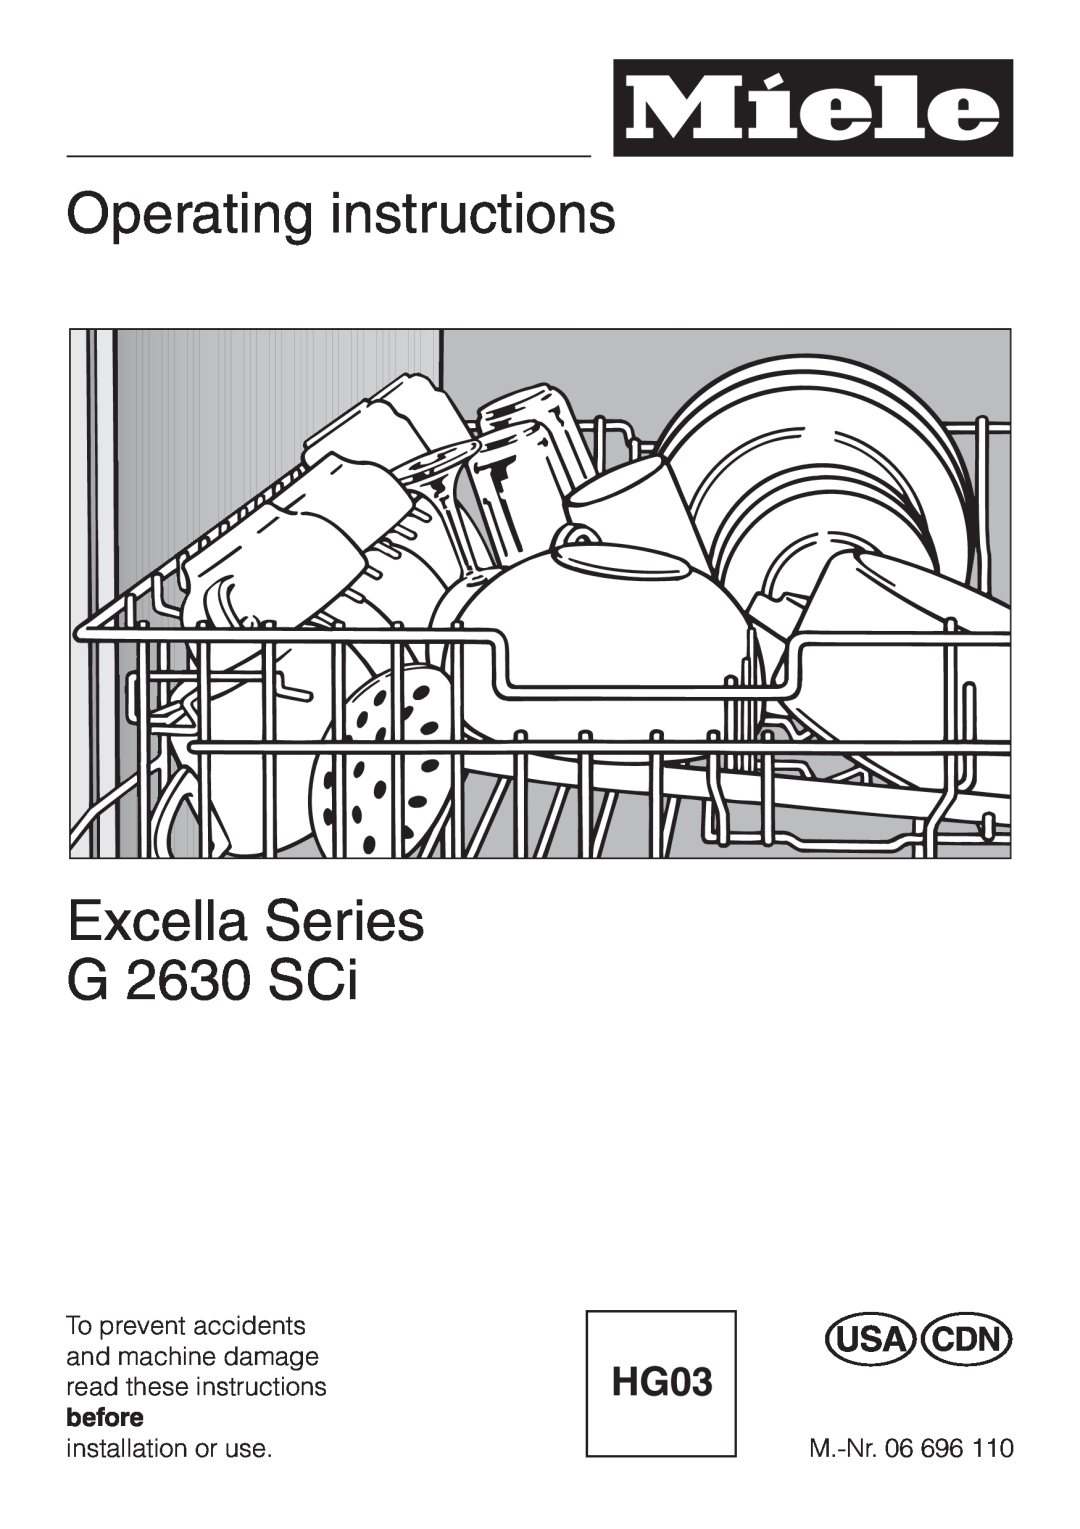 Miele G 2630 SCI manual Operating instructions Excella Series G 2630 SCi 